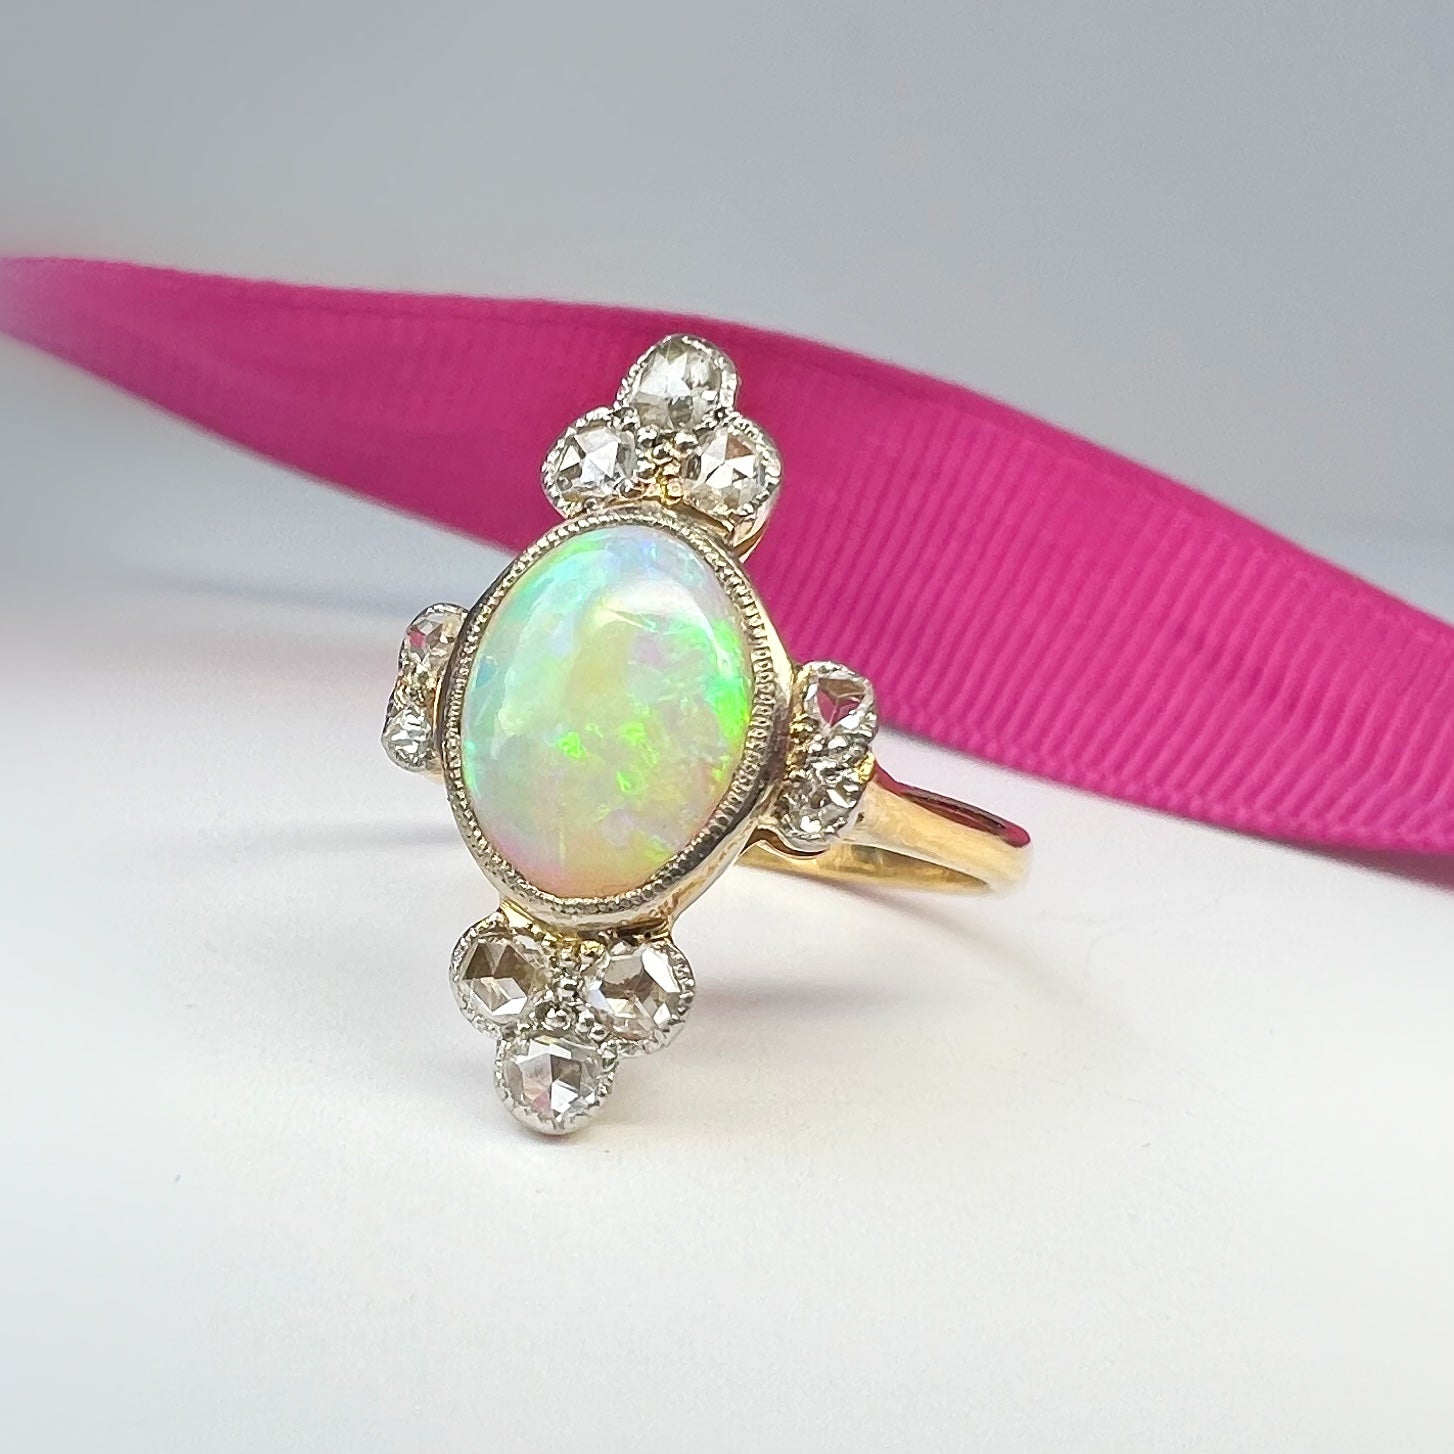 Ornate Antique Opal and Diamond Ring